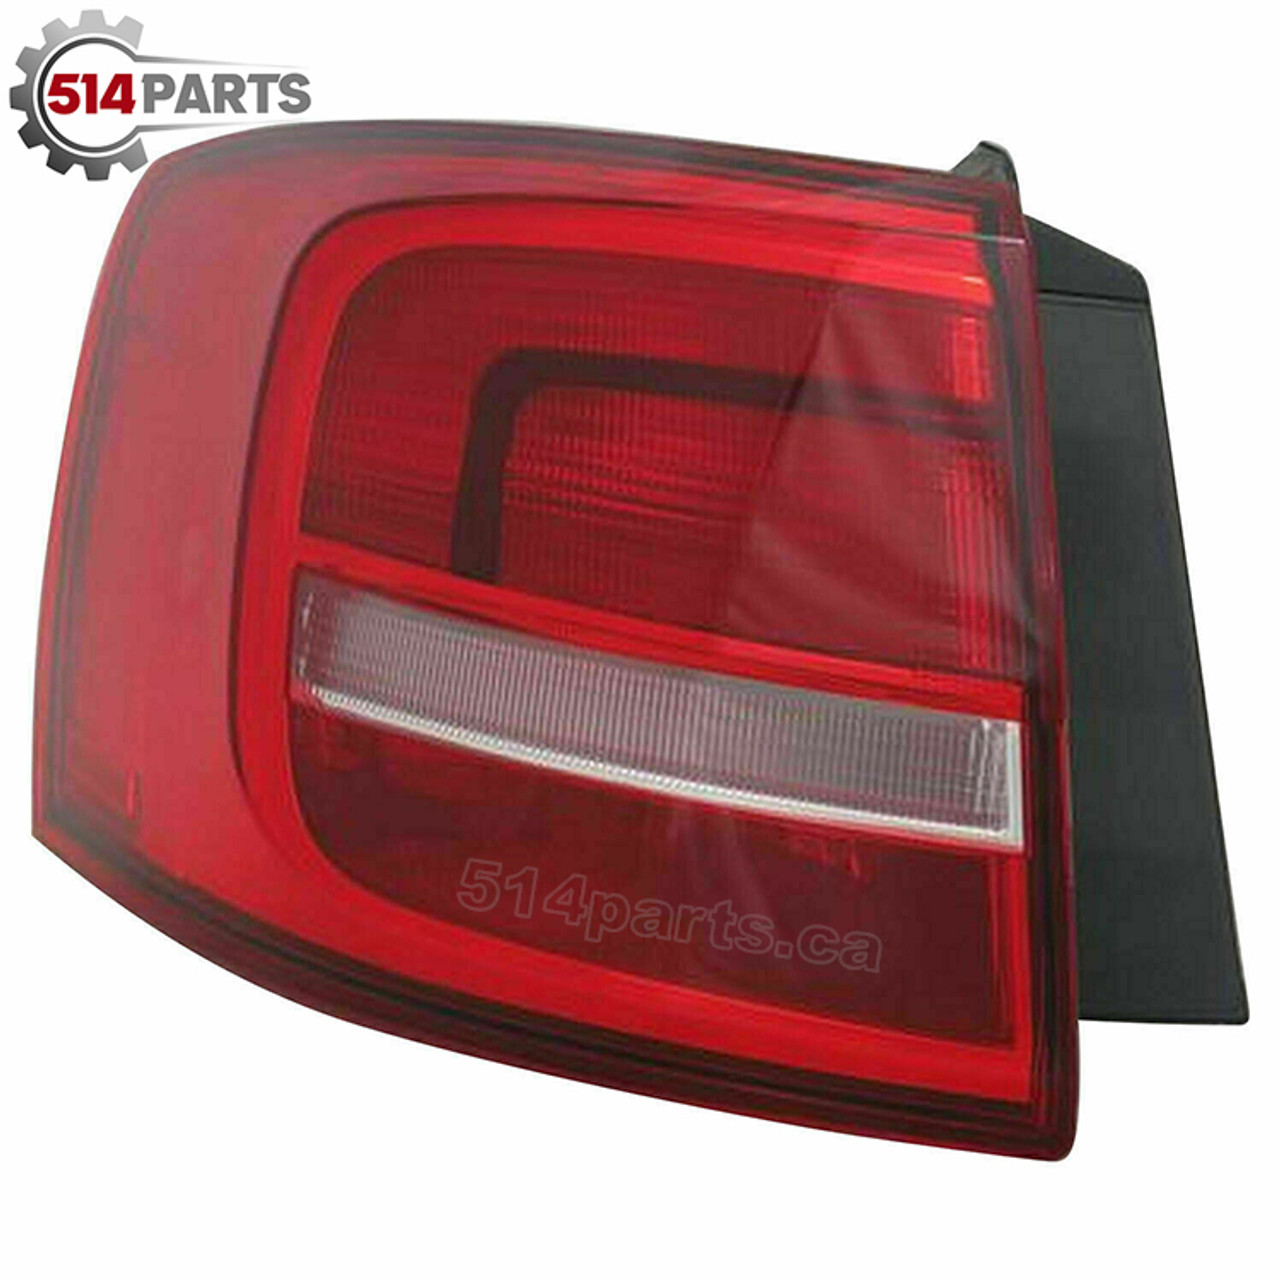 2015 - 2018 VOLKSWAGEN JETTA TAIL LIGHTS BULB TYPE High Quality - PHARES ARRIERE AMPOULE Haute Qualite